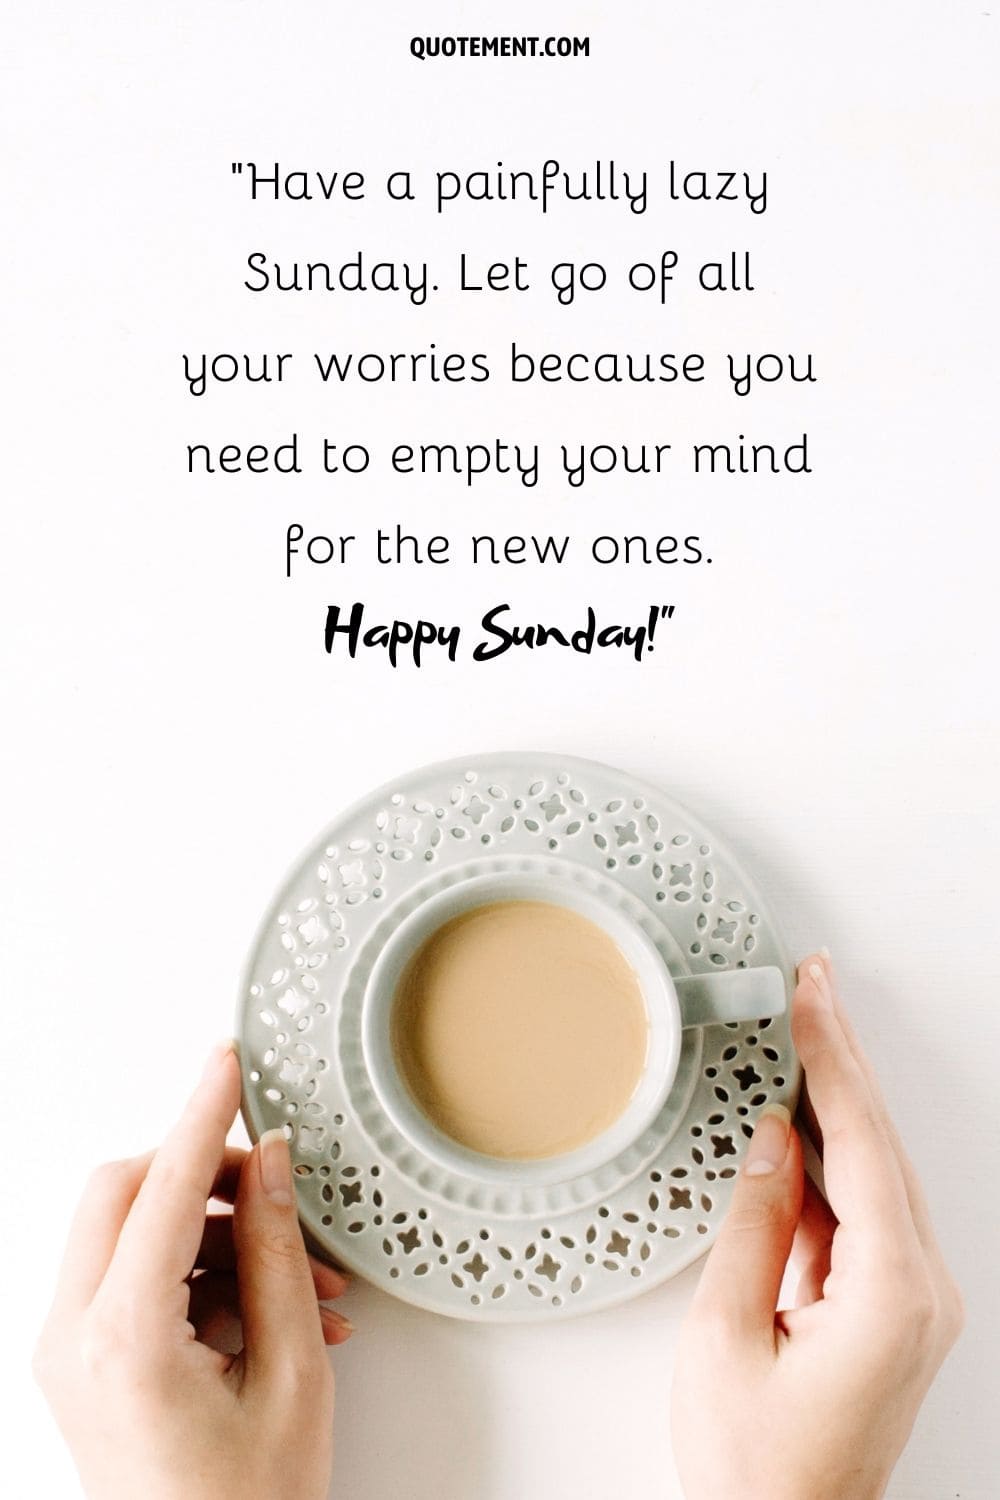 funny and endorsing lazy sunday message represented by a white coffee mug